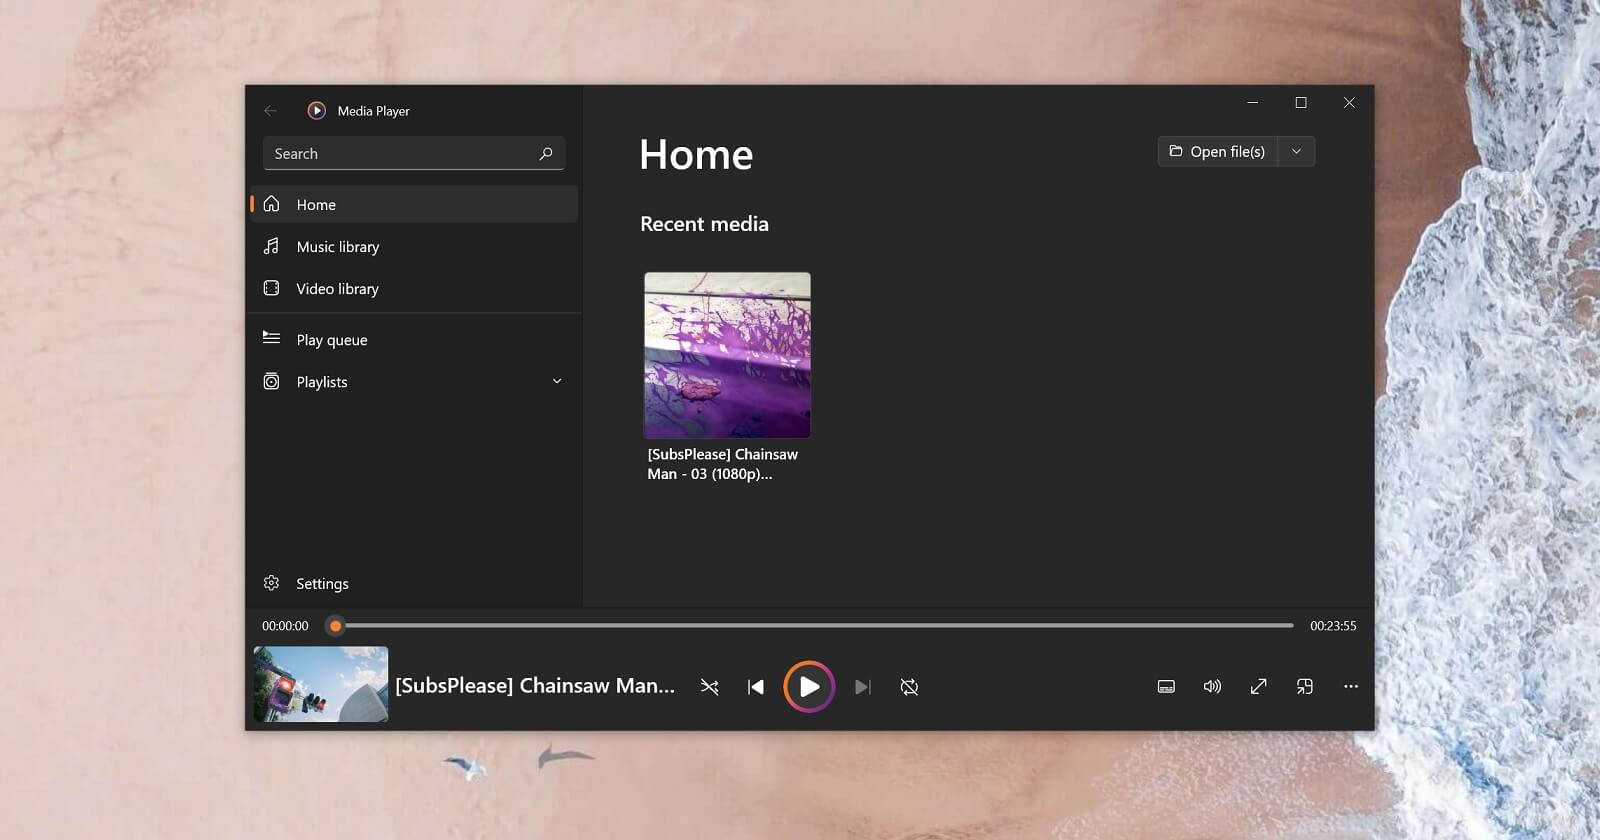 The groundbreaking Windows 11 media player is finally coming to Windows 10